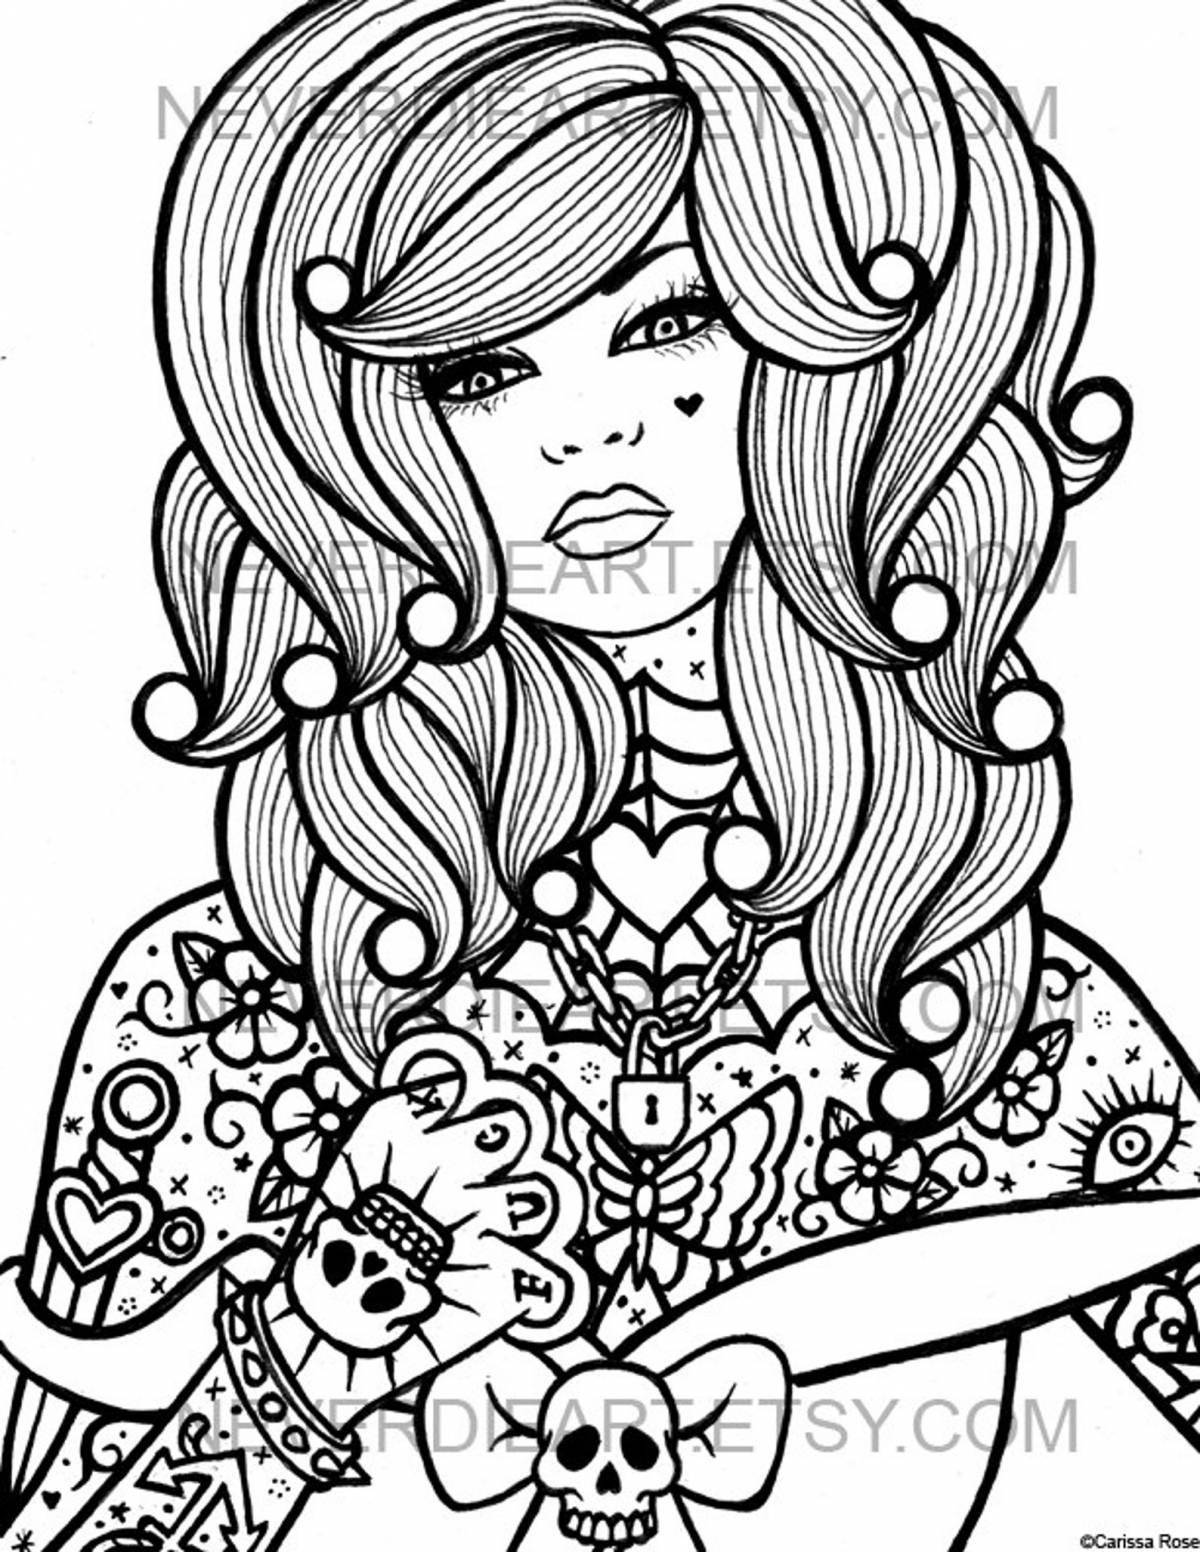 Incredible coloring book for girls 16 years old